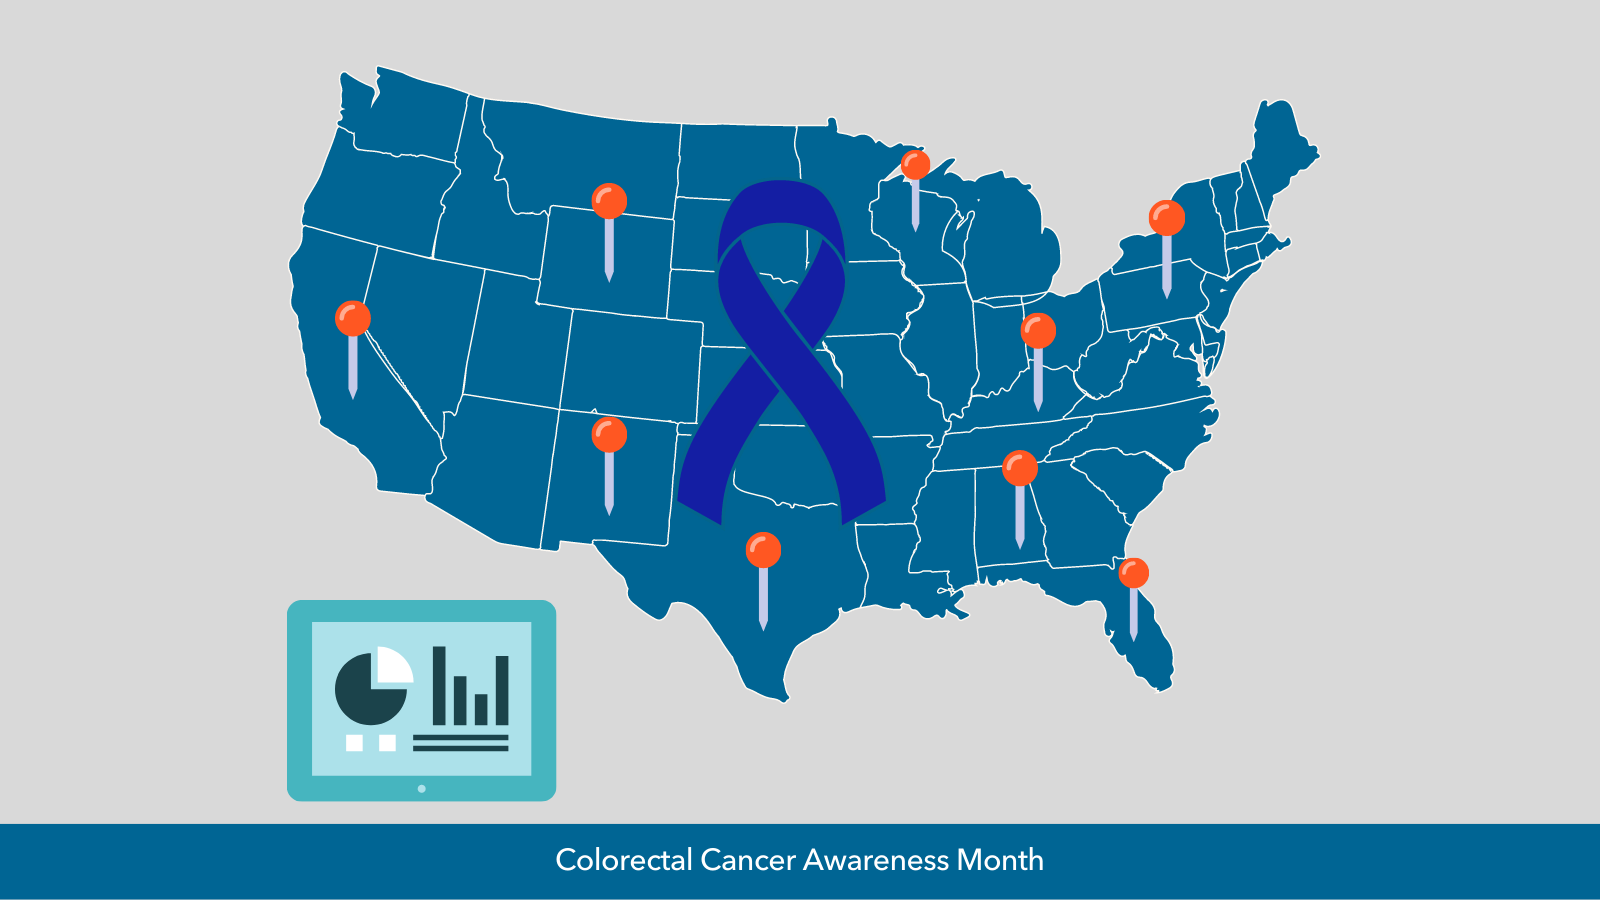 Image of map with different pin points with overlay image of colorectal cancer ribbon and image of data